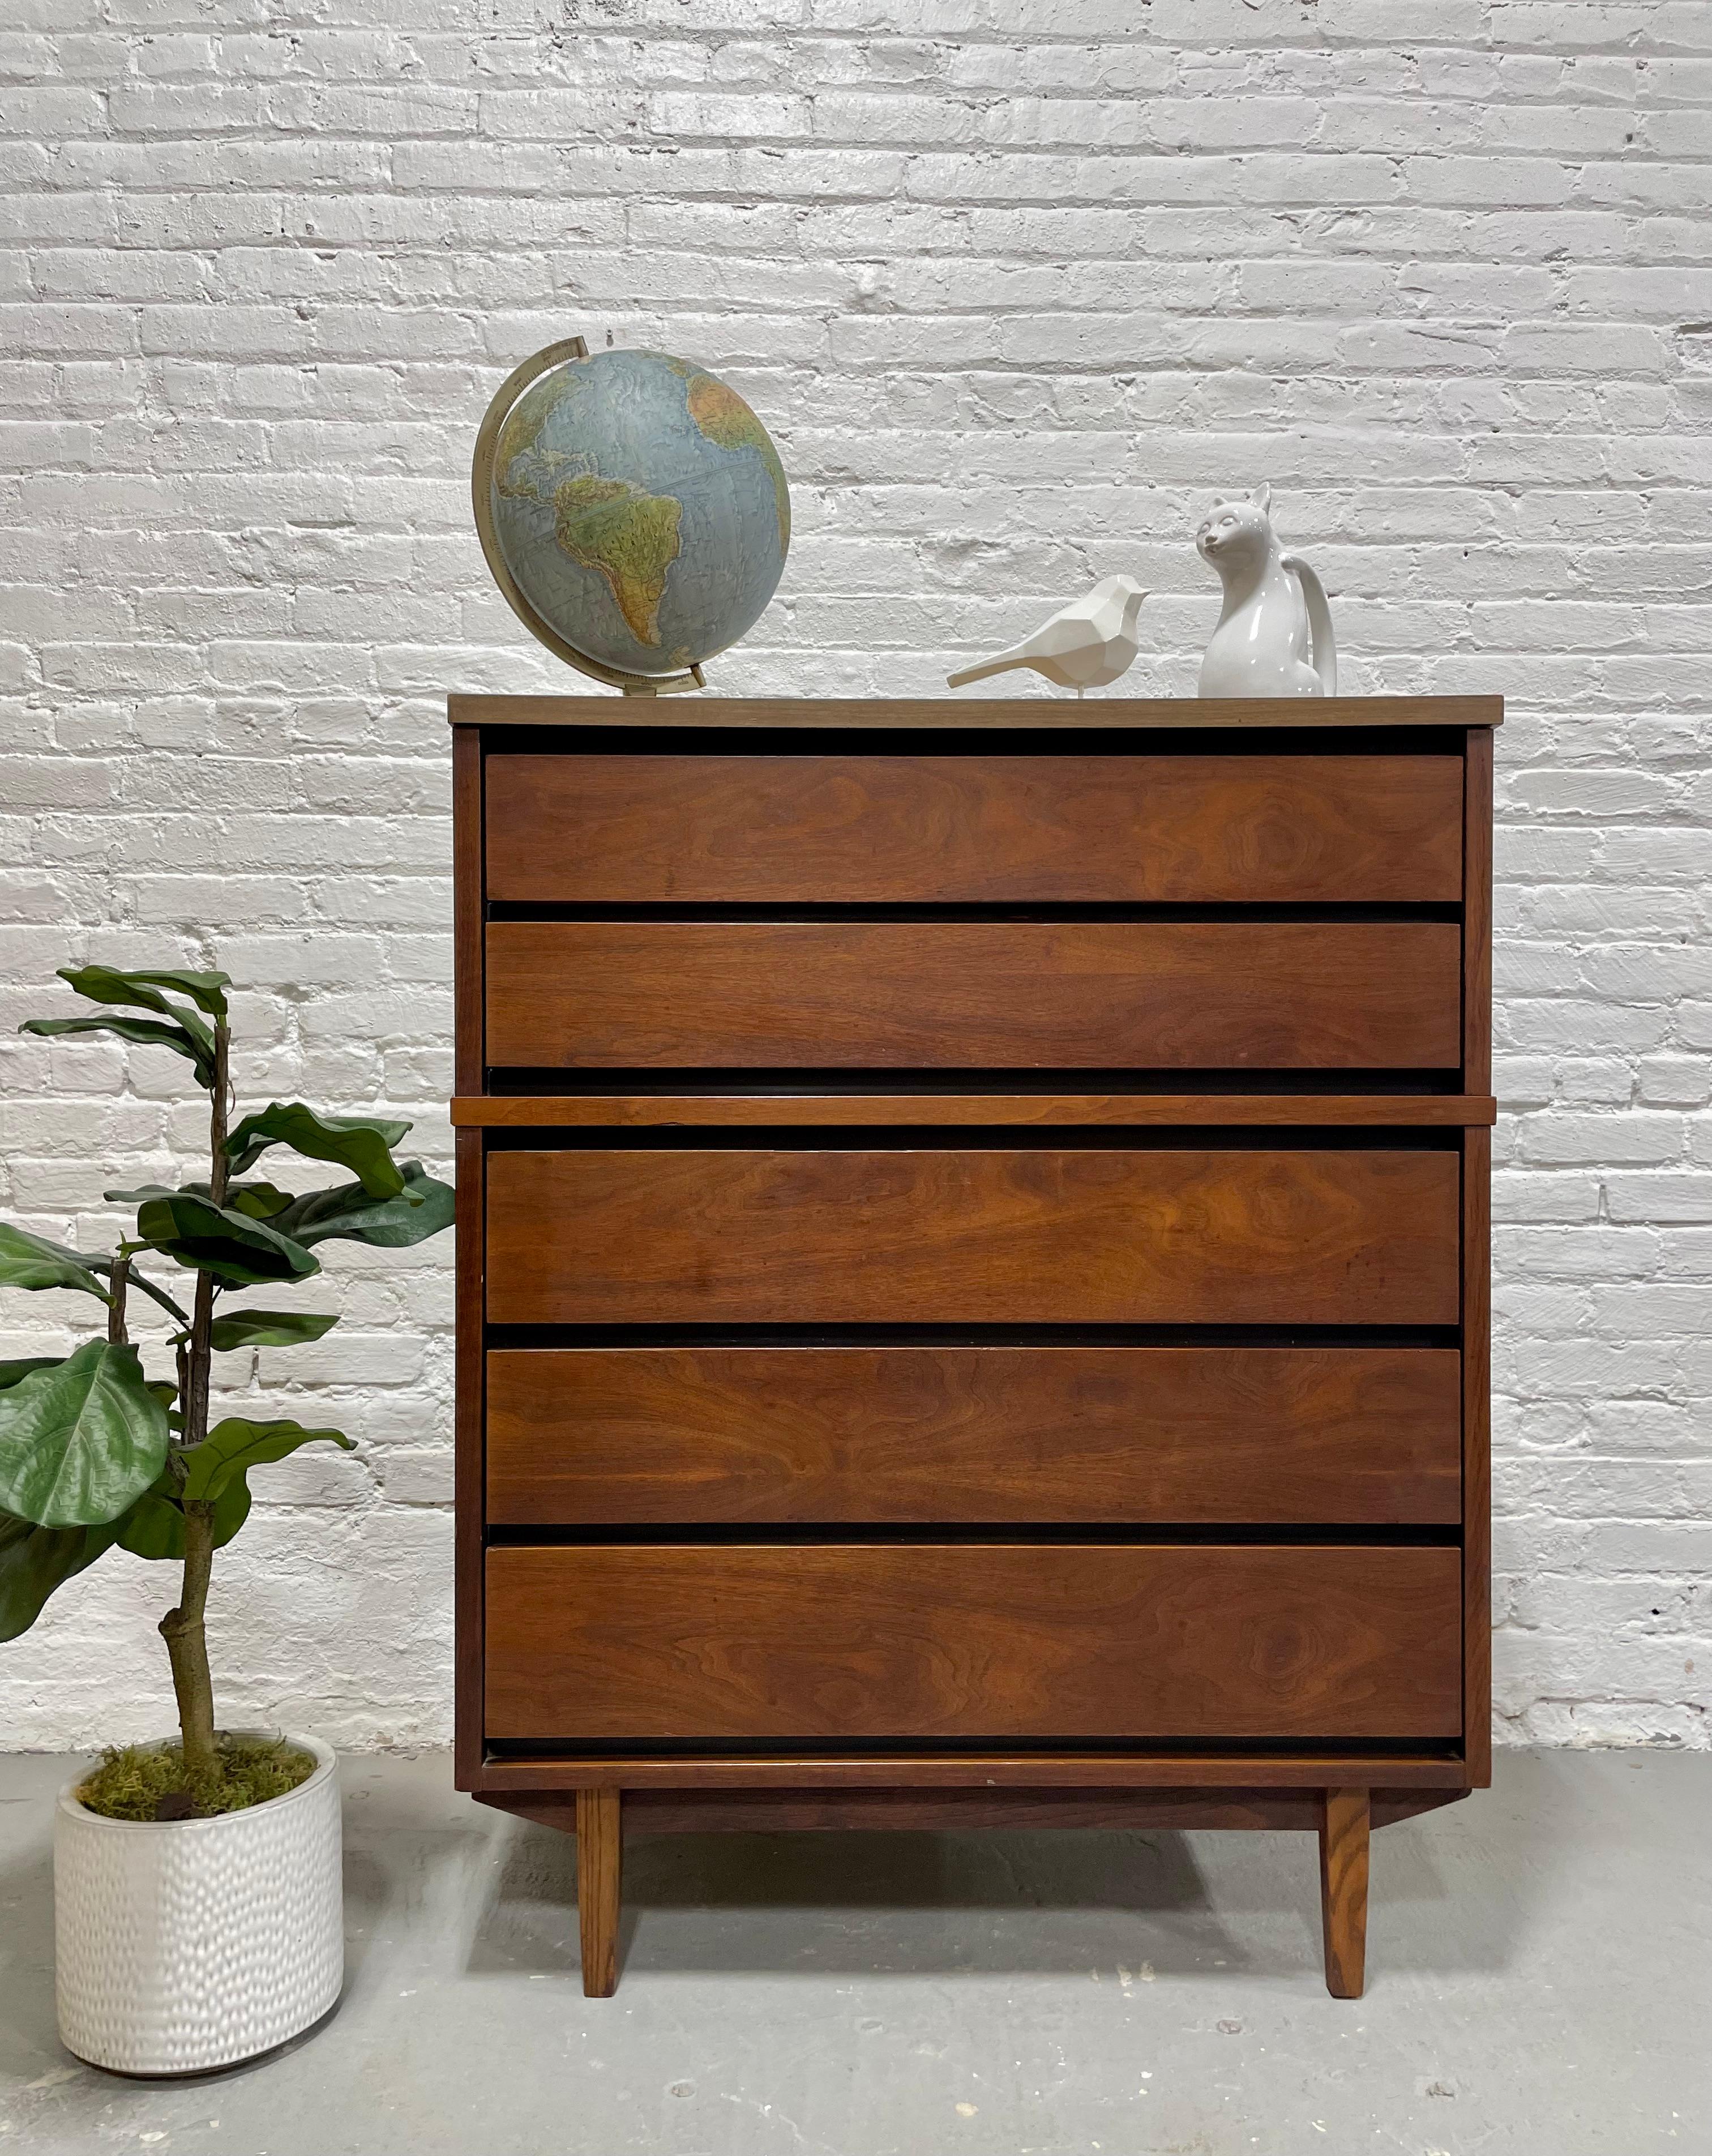 Mid Century Modern Walnut Dresser by Stanley Furniture Co., c. 1960's. This solid dresser offers a ton of storage space over five spacious drawers.  Gorgeous woodgrains and the wood is a rich, deep walnut color. Laminate tabletop, perfect for